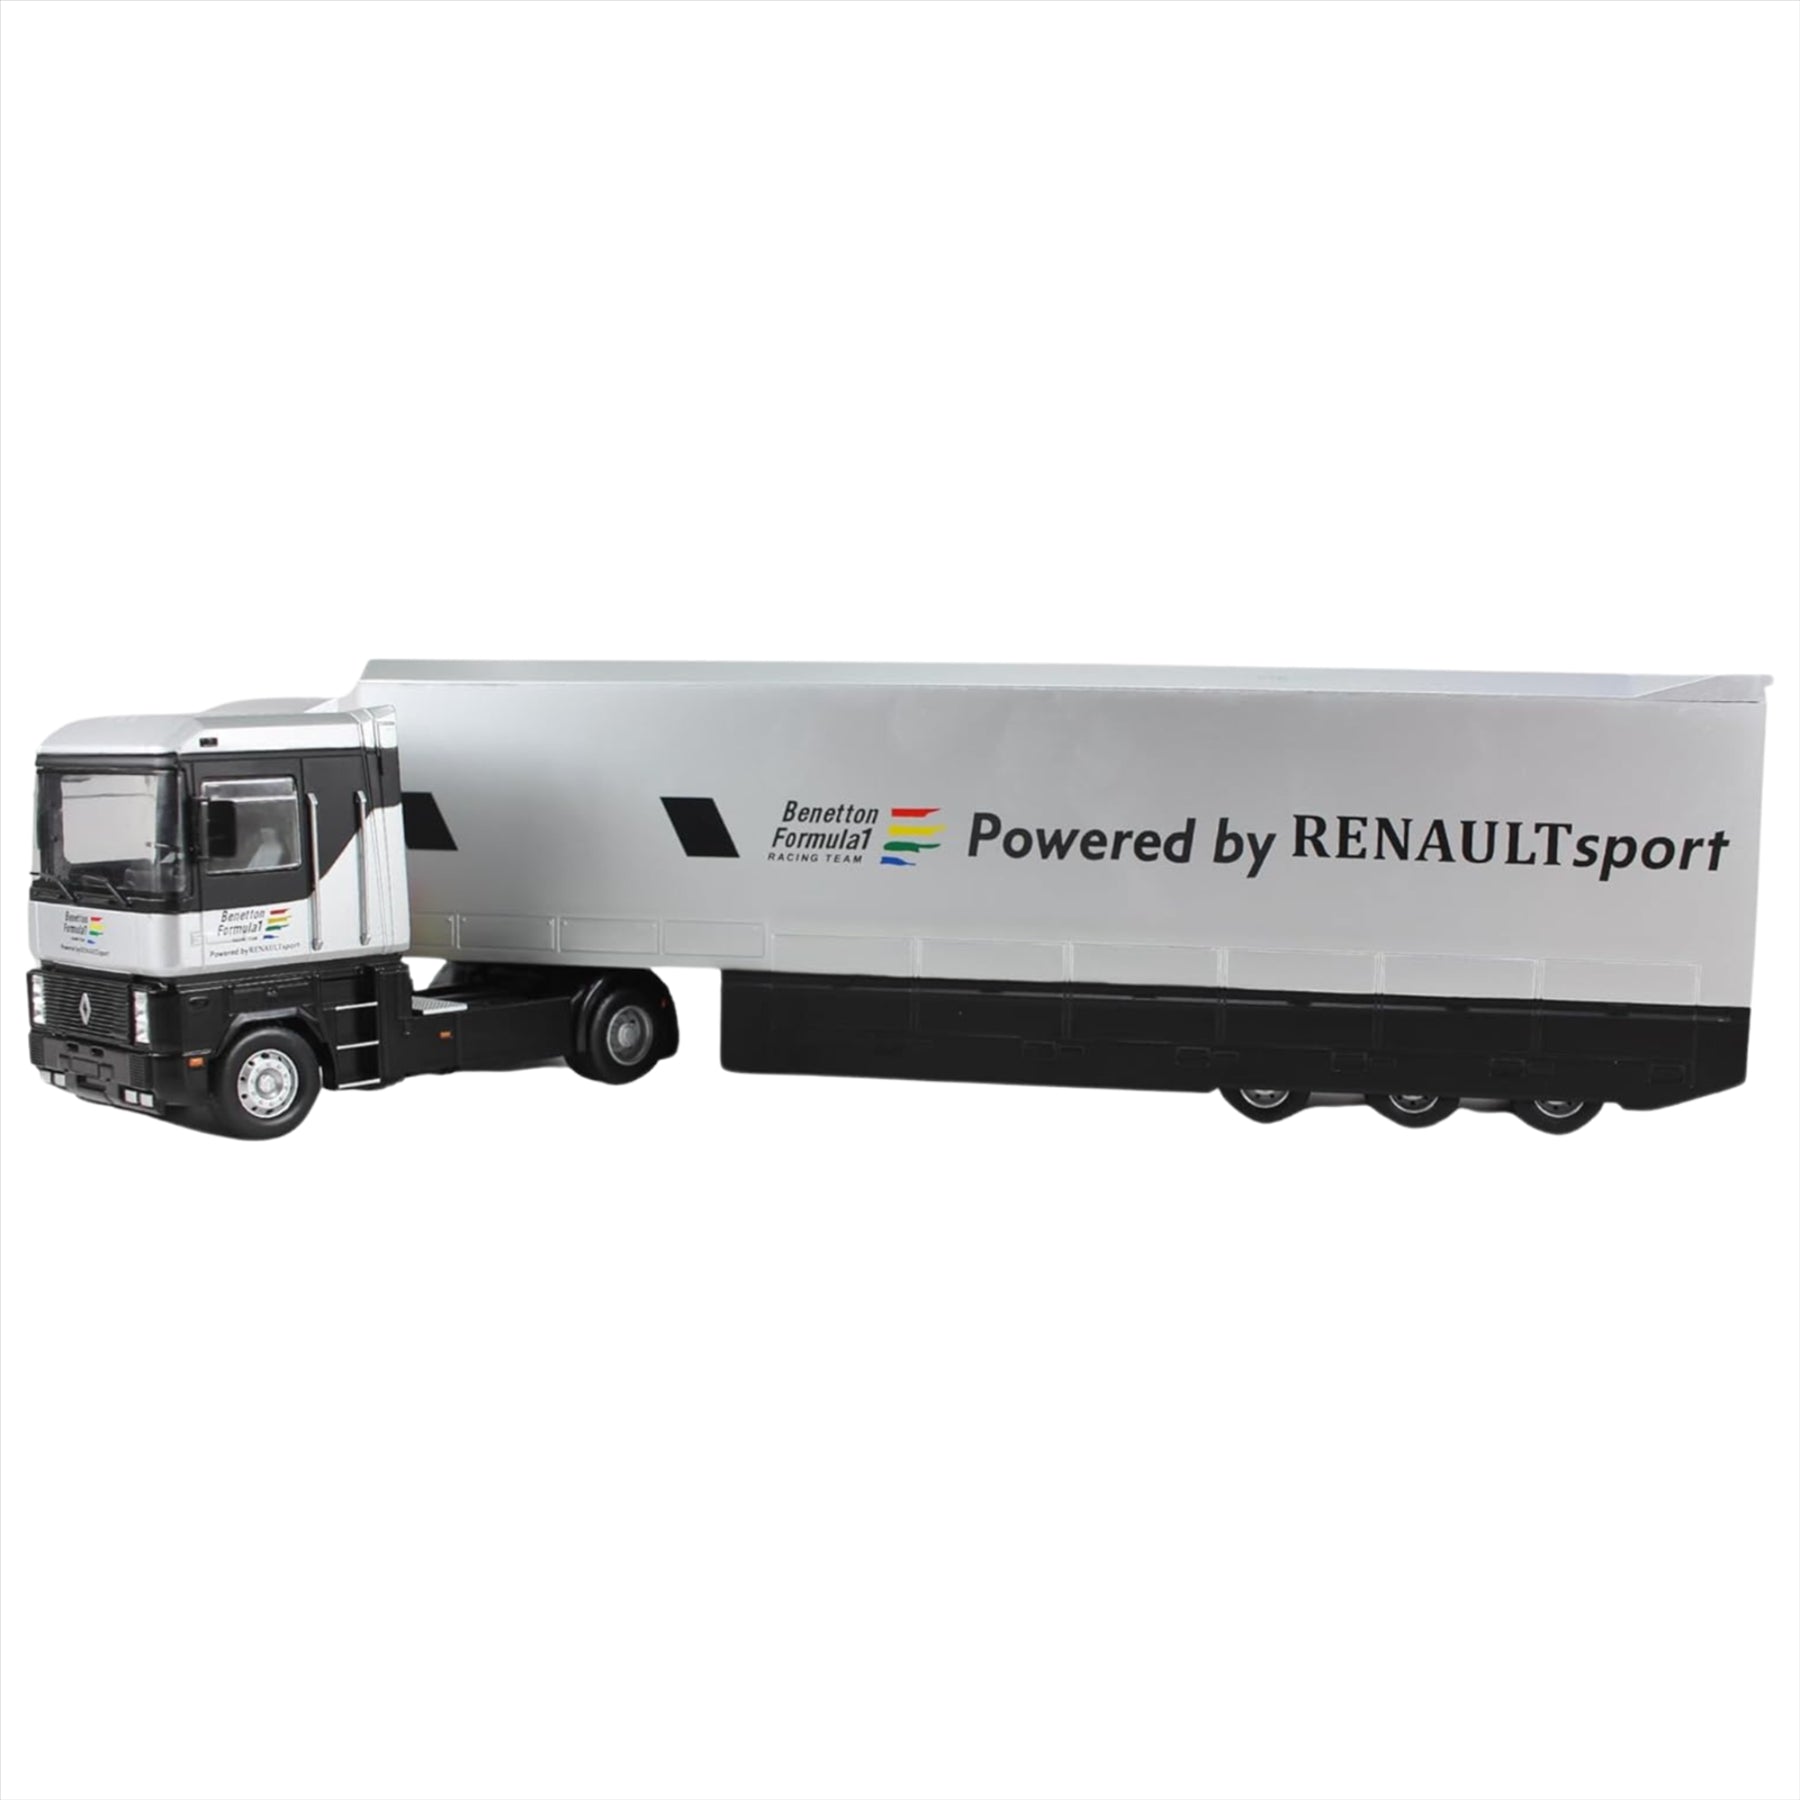 F1 Formula 1 - Centauria 1:43 Scale Large Diecast Articulated HGV Lorry & Trailer - Renault Magnum Official Team Transport - 37cm in Length - Toptoys2u